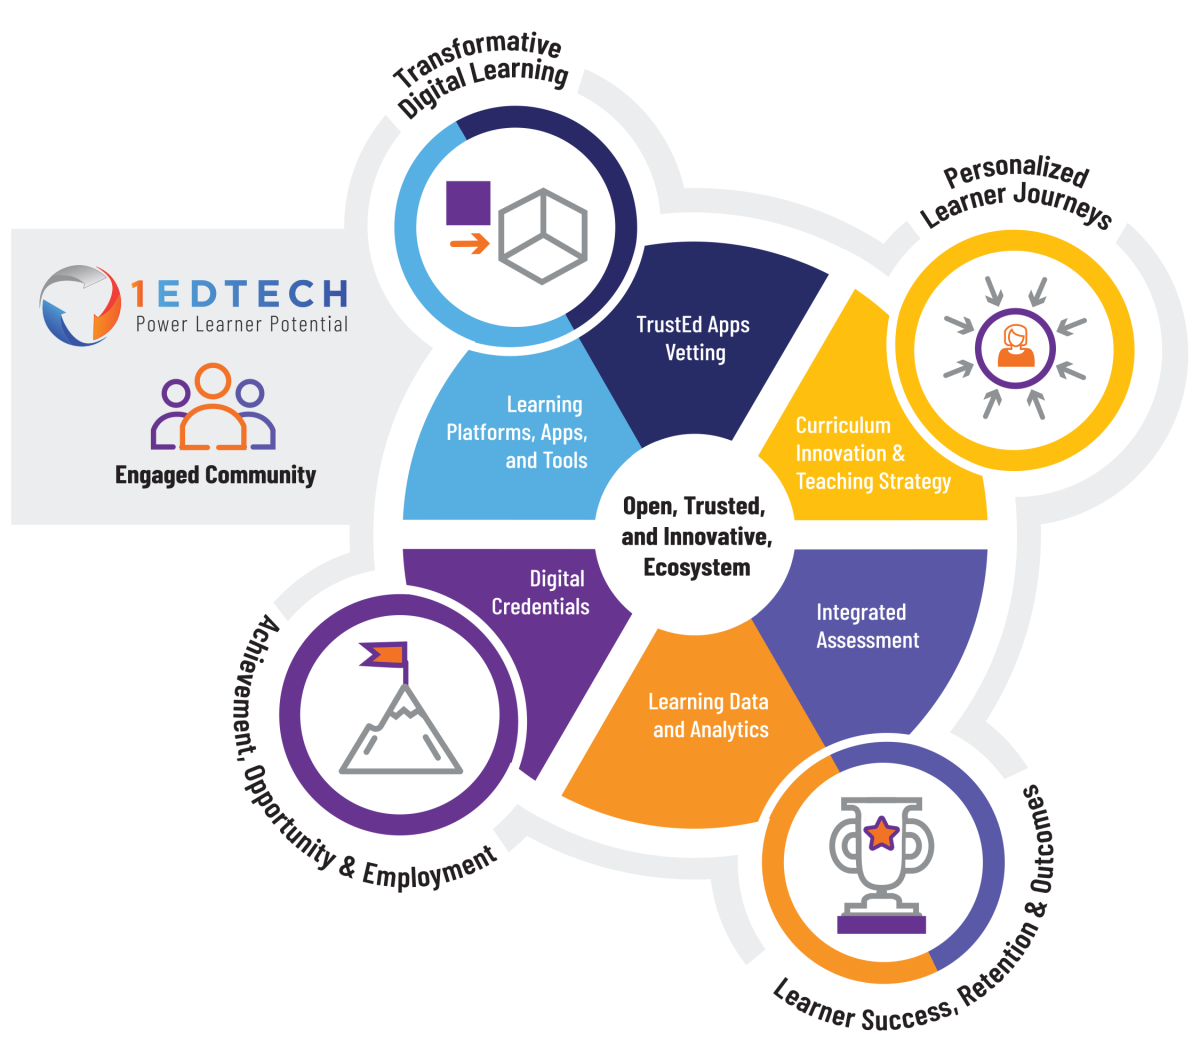 1EdTech's mission is guided by four strategic leadership imperatives and carried out by our six workstreams.